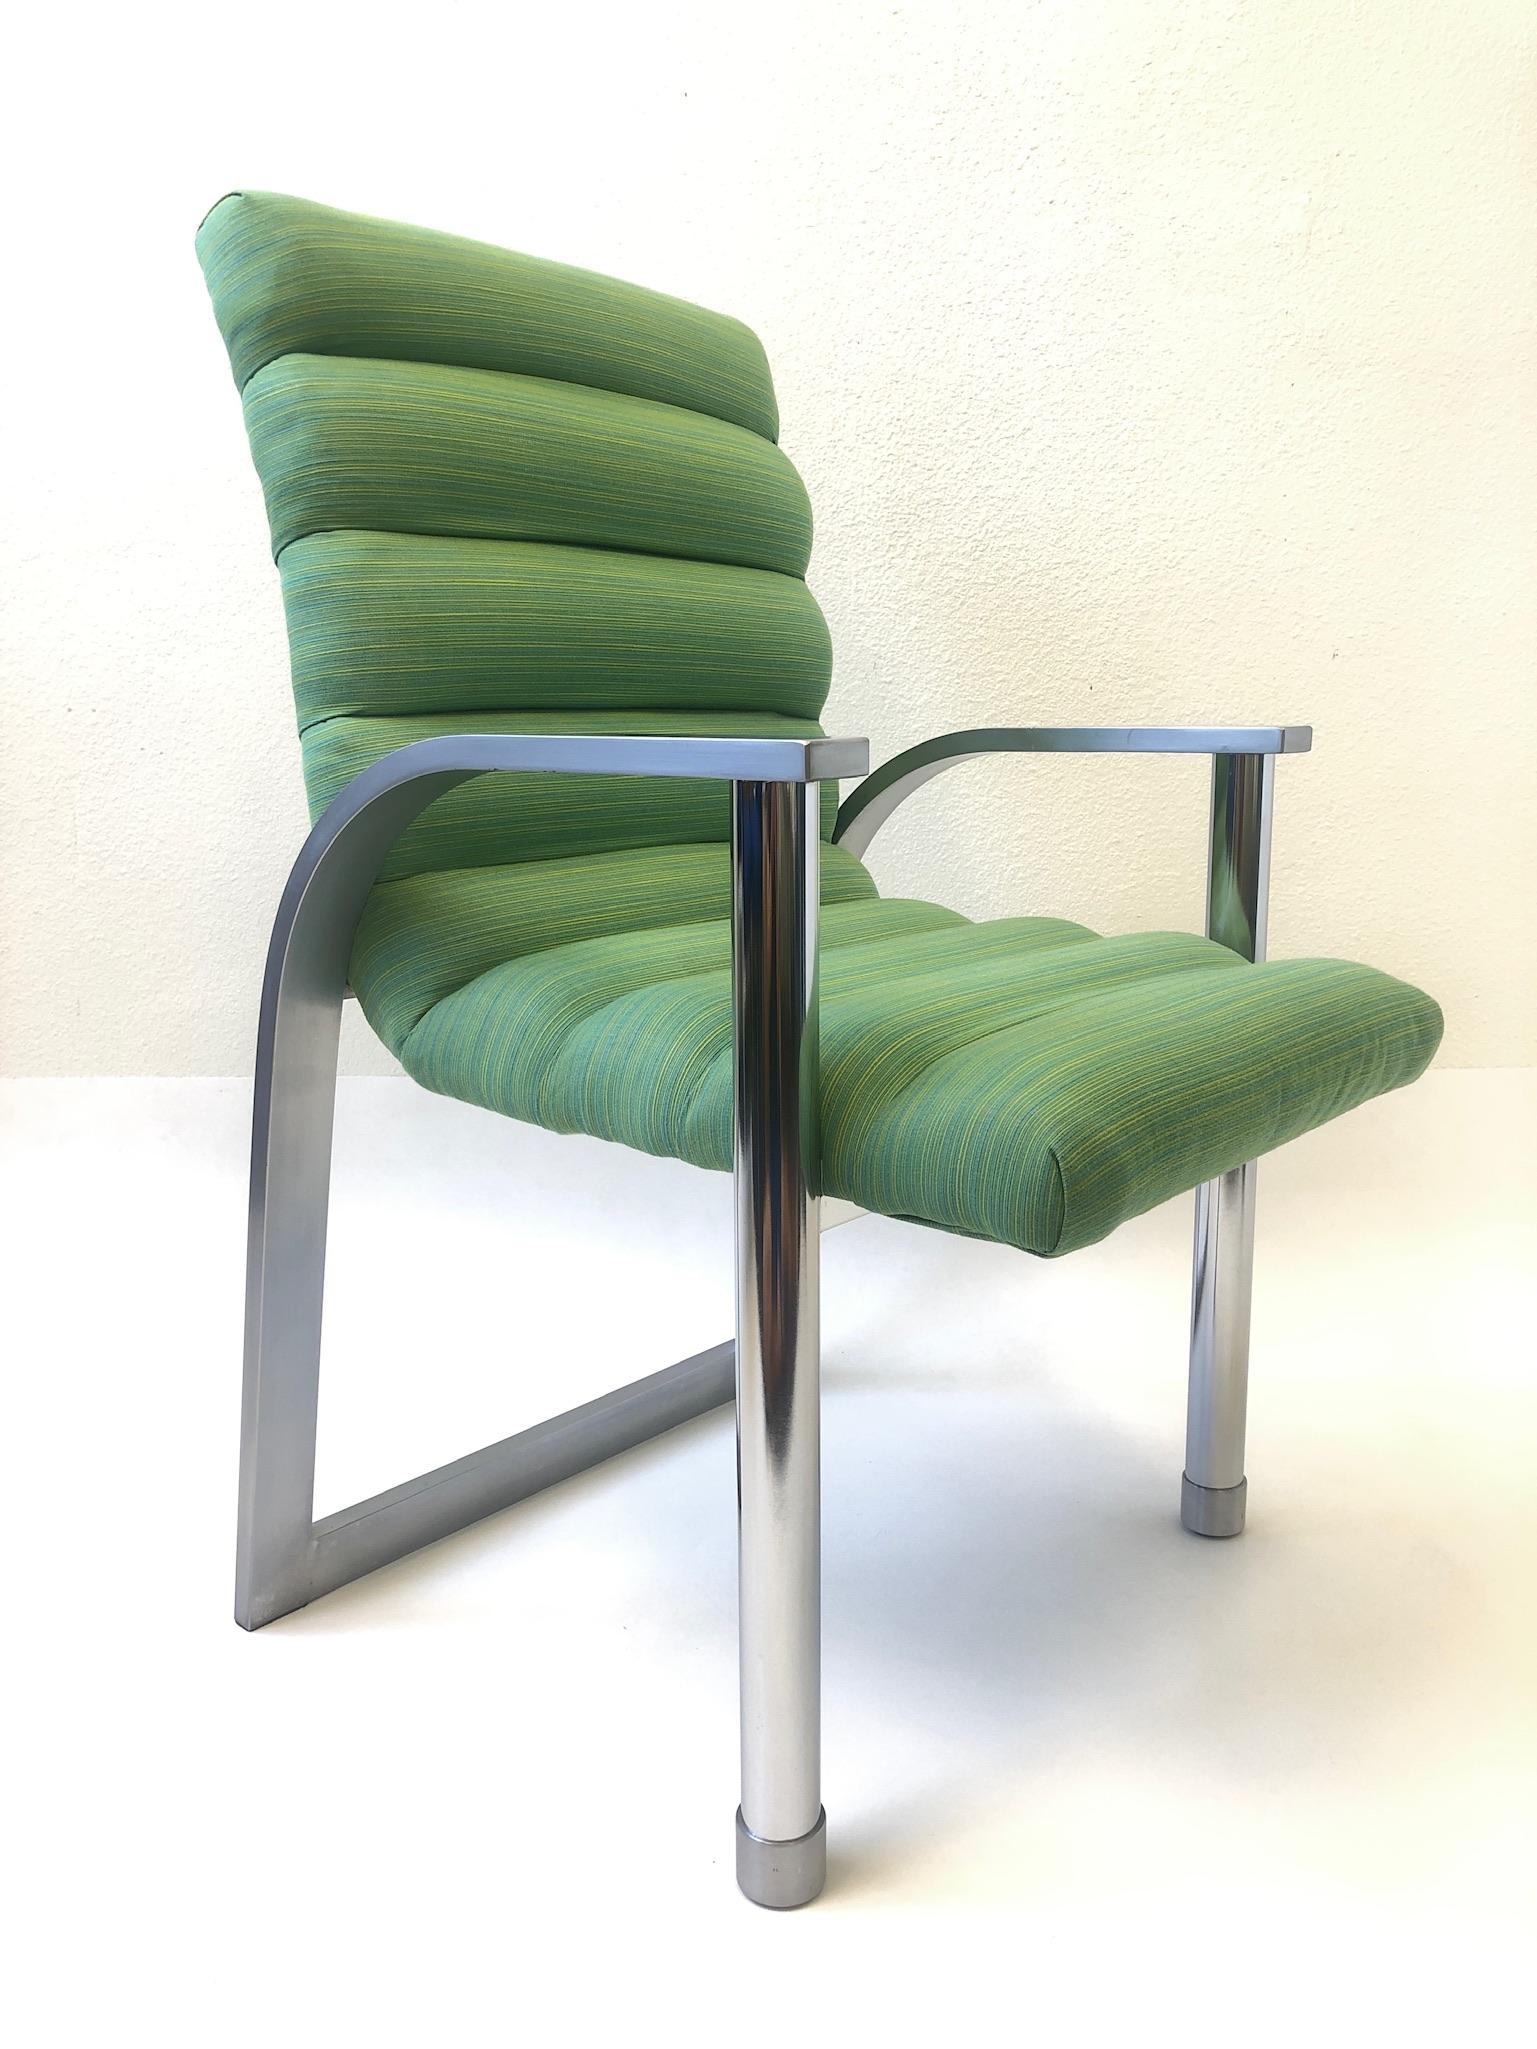 American Set of Six Stainless Steel and Green Fabric Dining Chairs by Jay Spectre For Sale